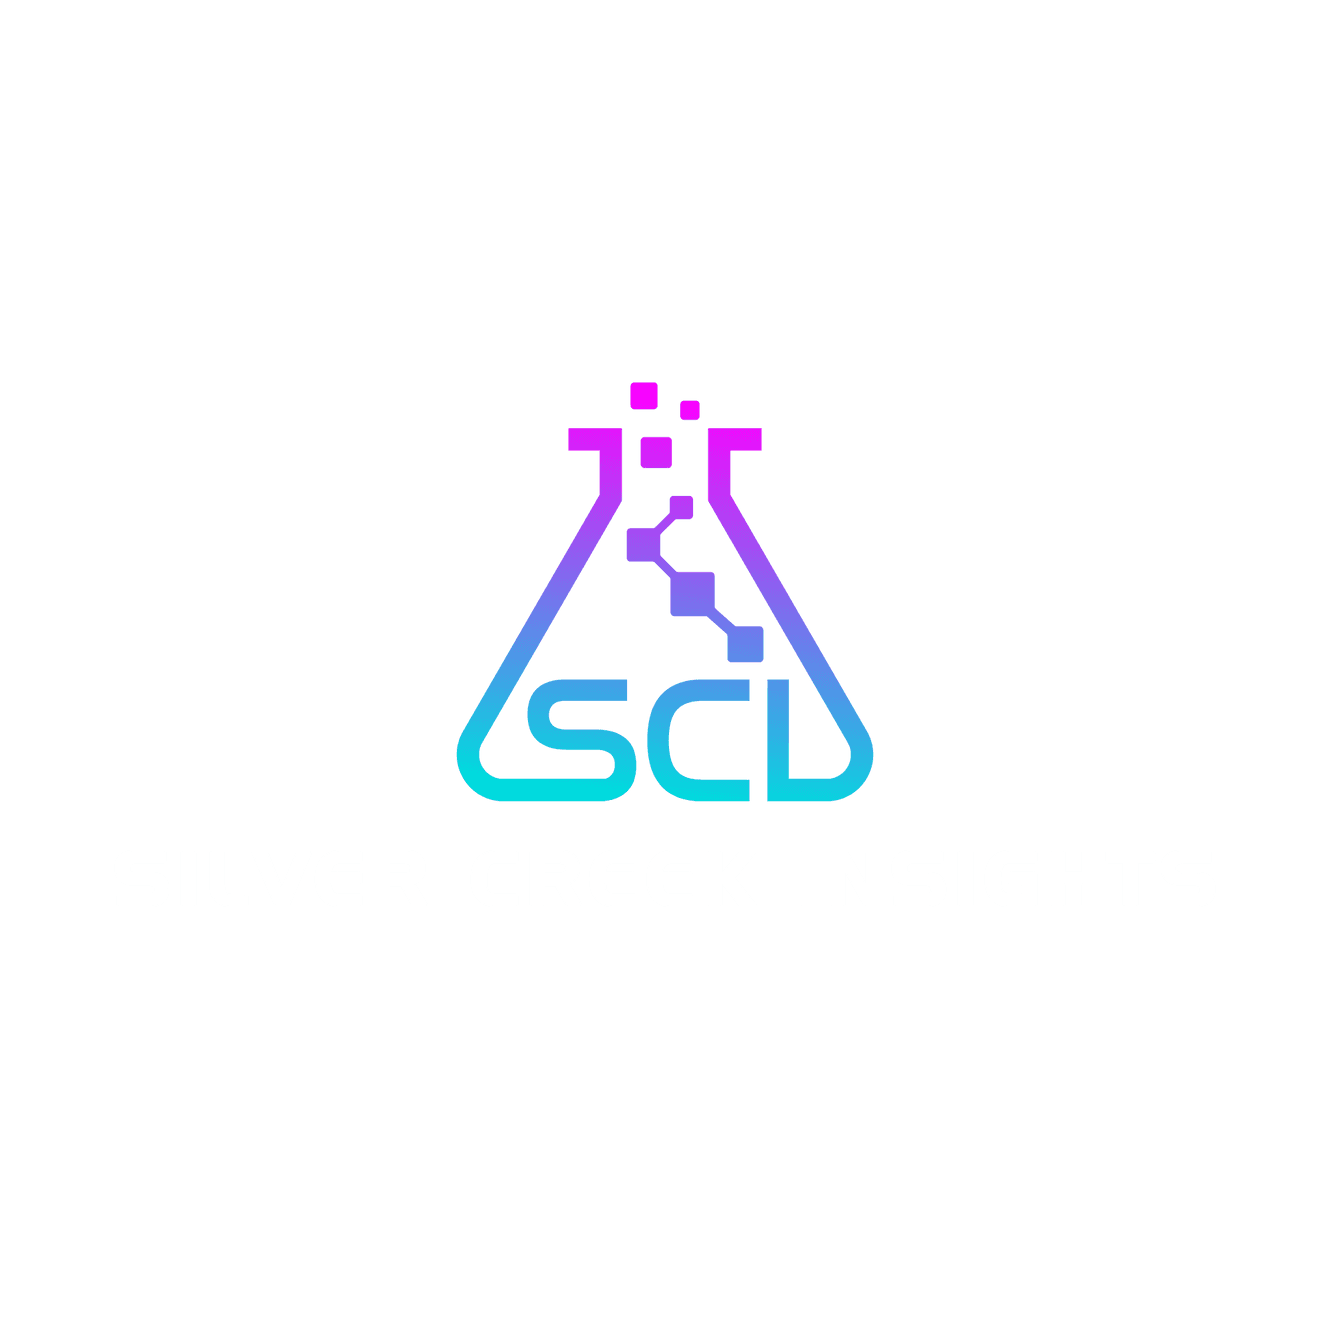 Product: Services | Silver Creek Insights 